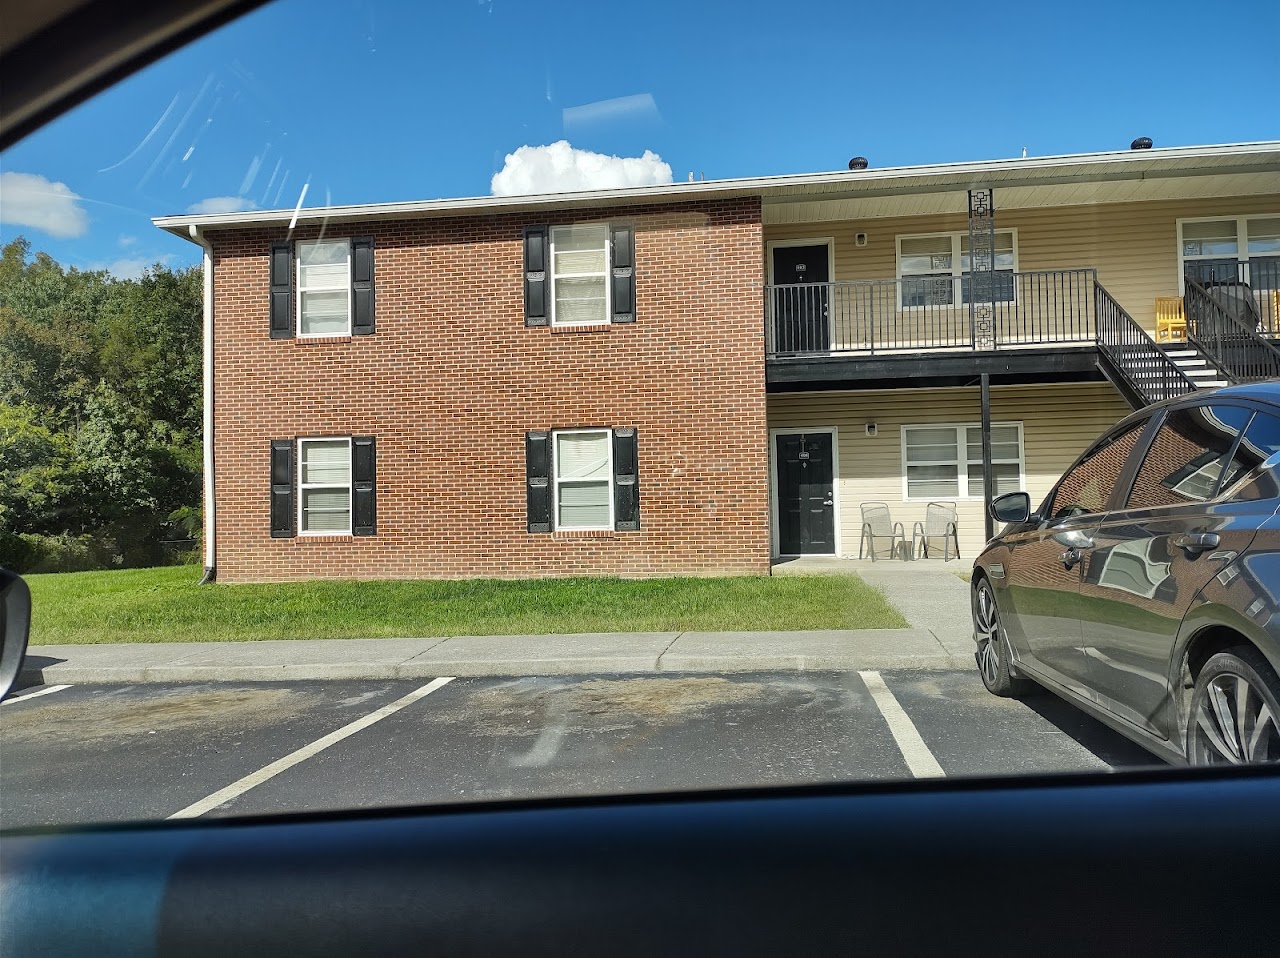 Photo of COCKE ESTATES. Affordable housing located at ALLA PL NEWPORT, TN 